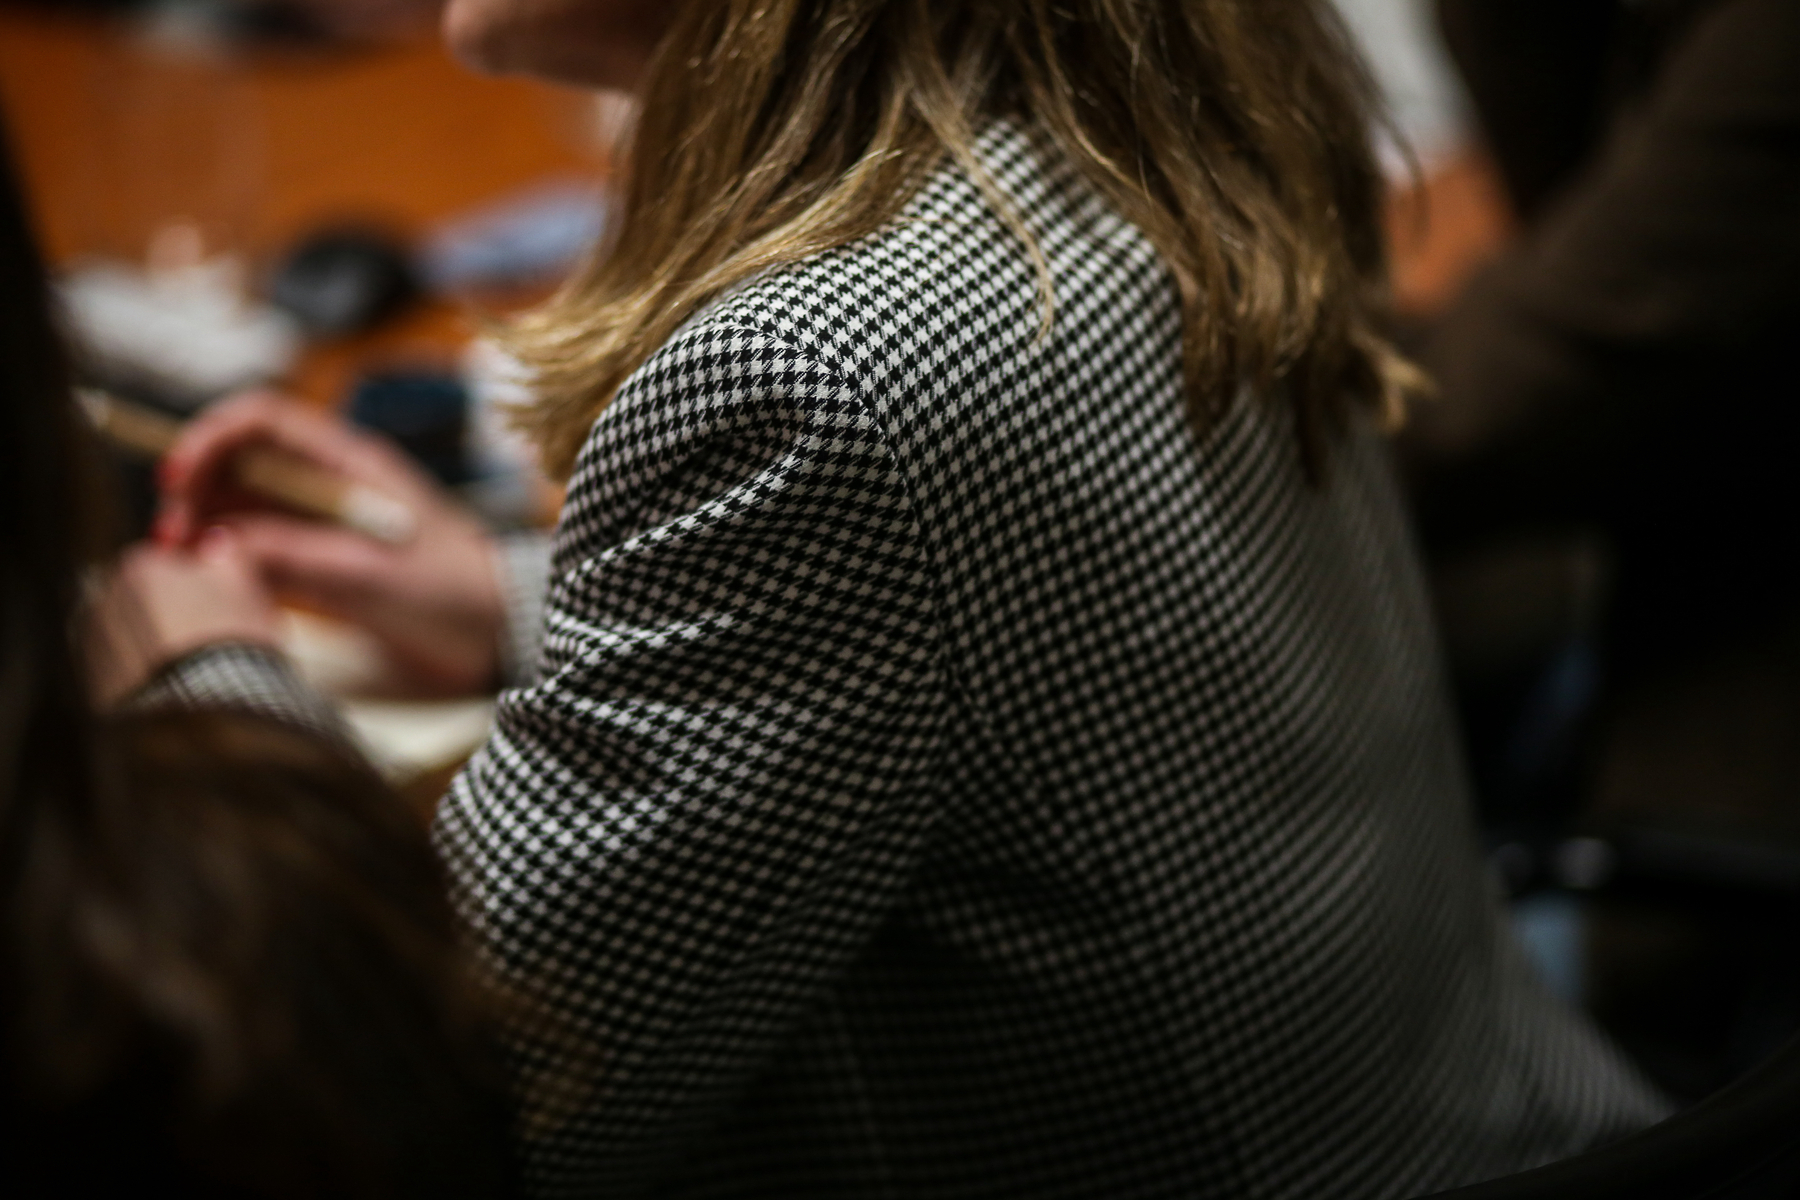 A person from behind wearing a pied de poule patterned blazer, slightly out of focus, with their hair covering part of the collar.